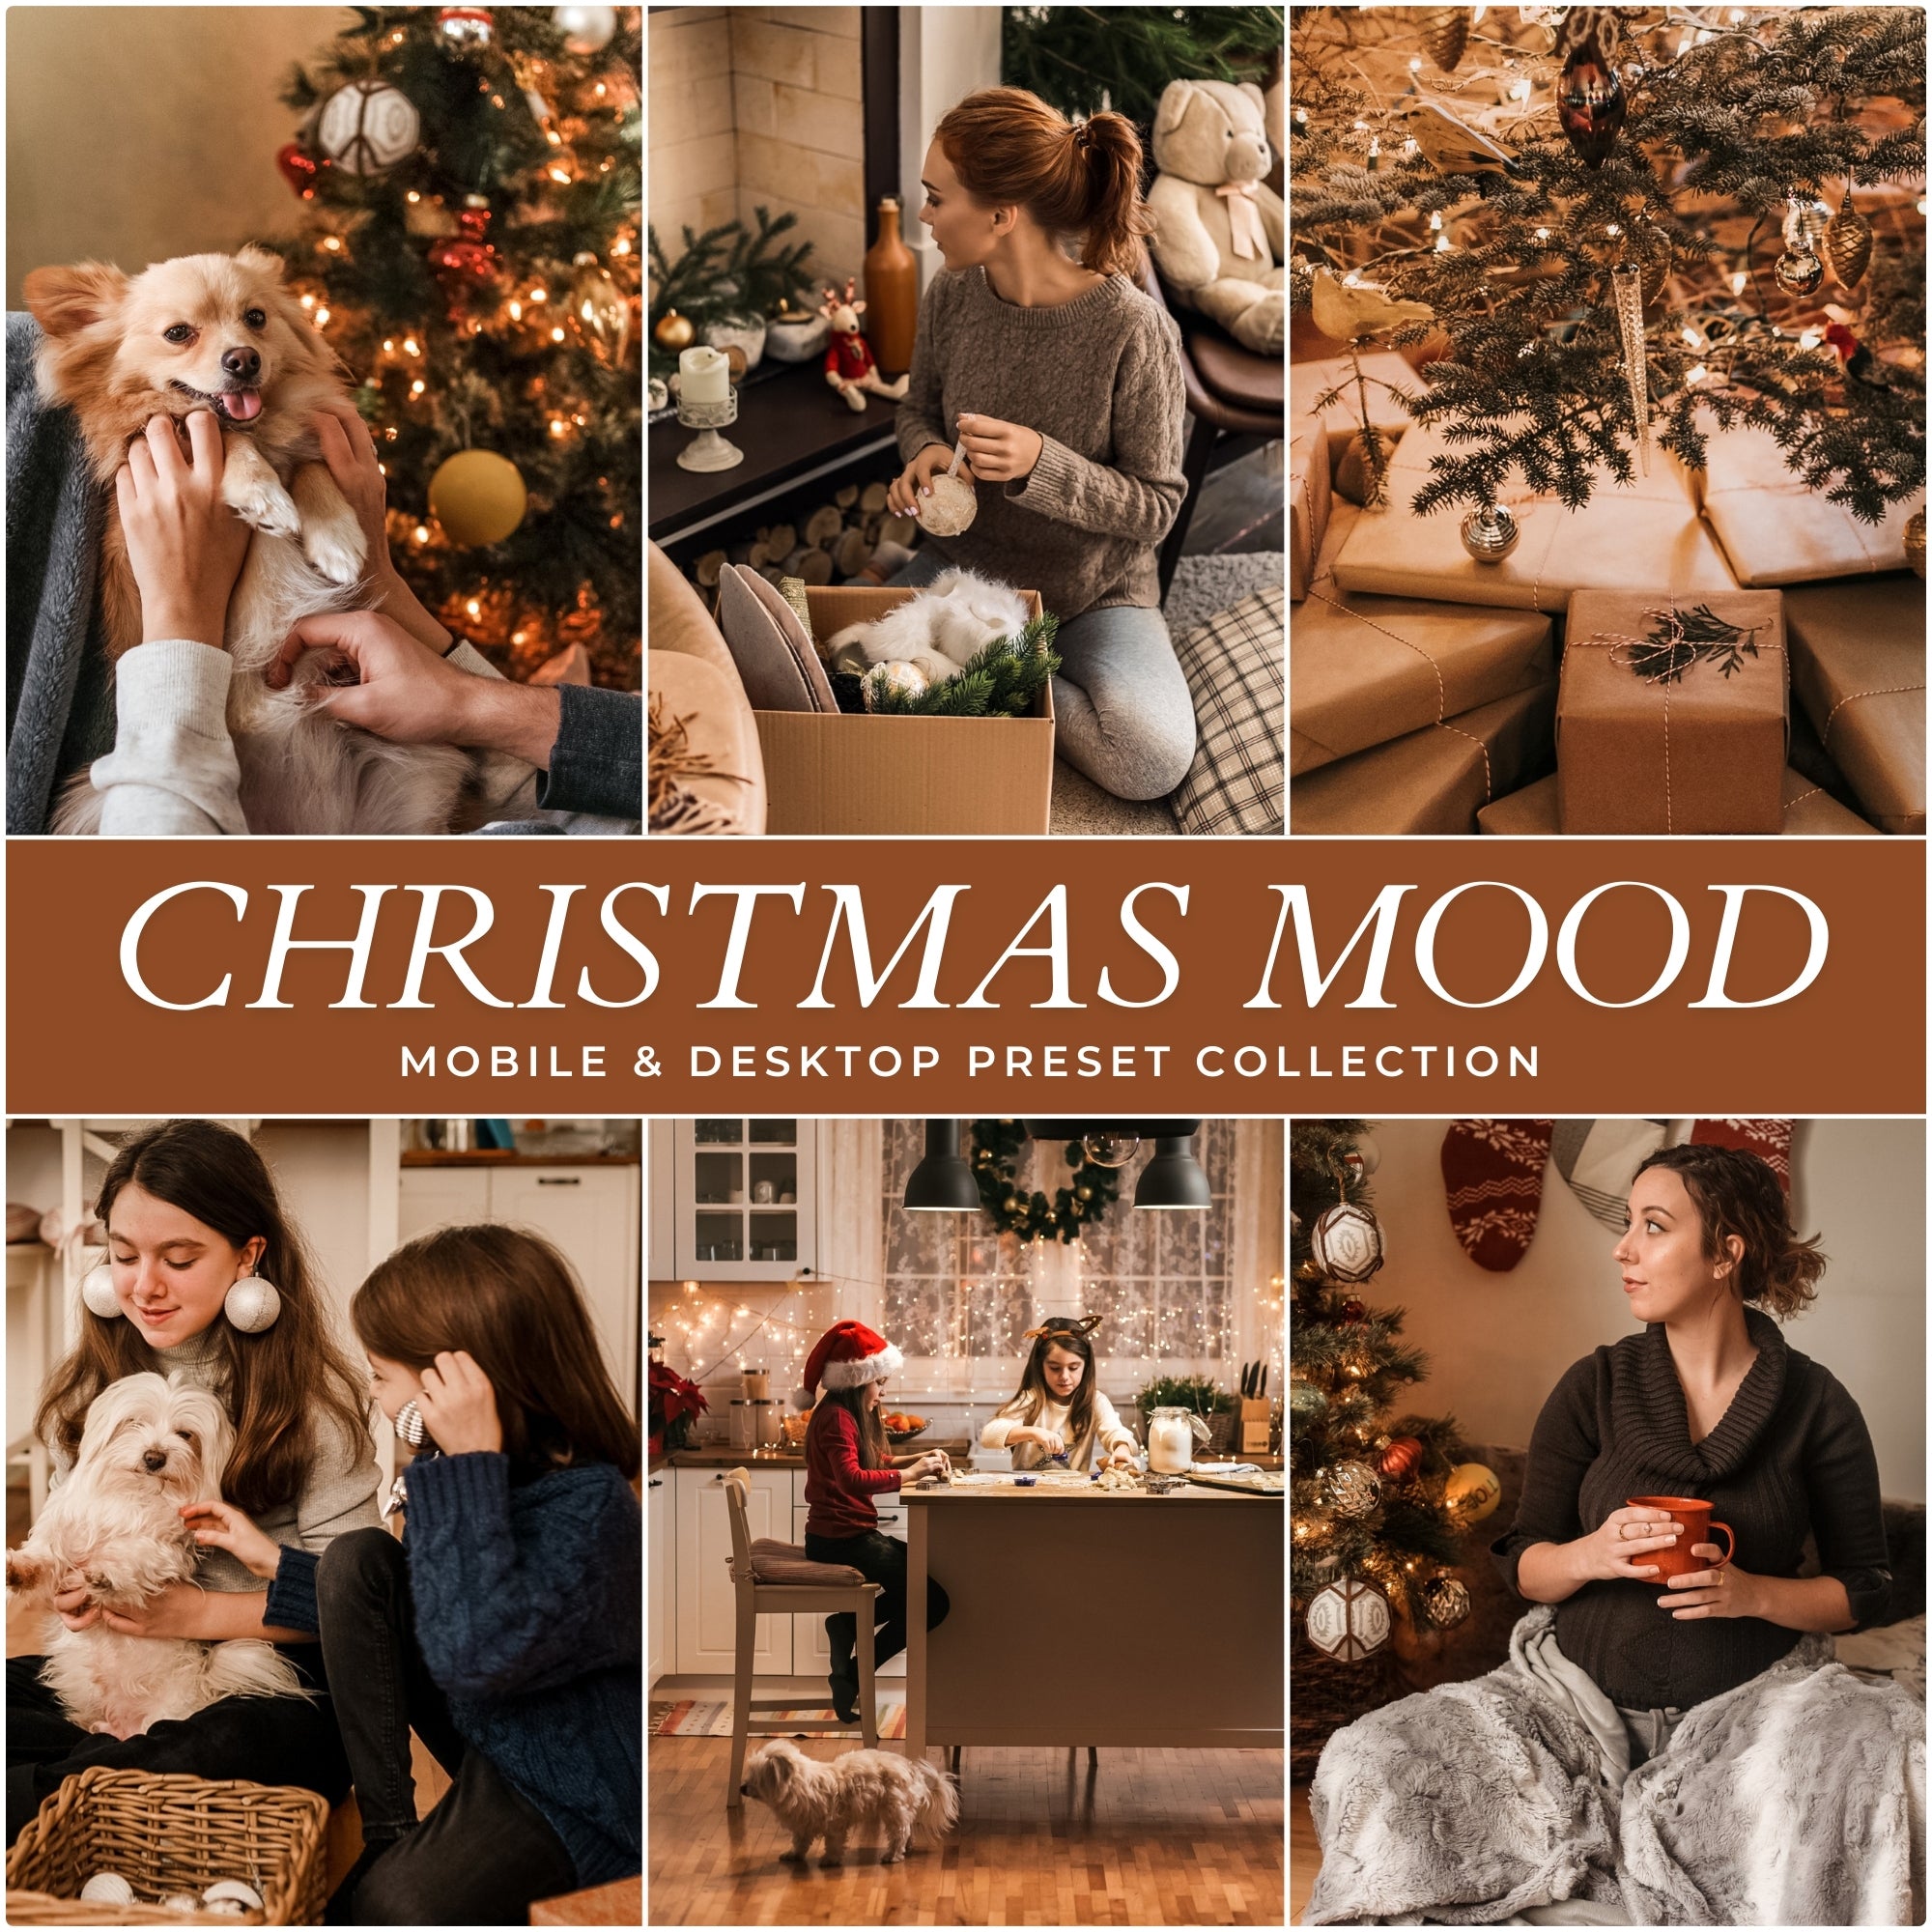 Moody Christmas Lightroom Presets The Best Photo Editing Preset Filters For Christmas And Winter Holiday Photos with Adobe Lightroom Mobile And Desktop For Photographers and Instagram Influencers By Lou And Marks Presets